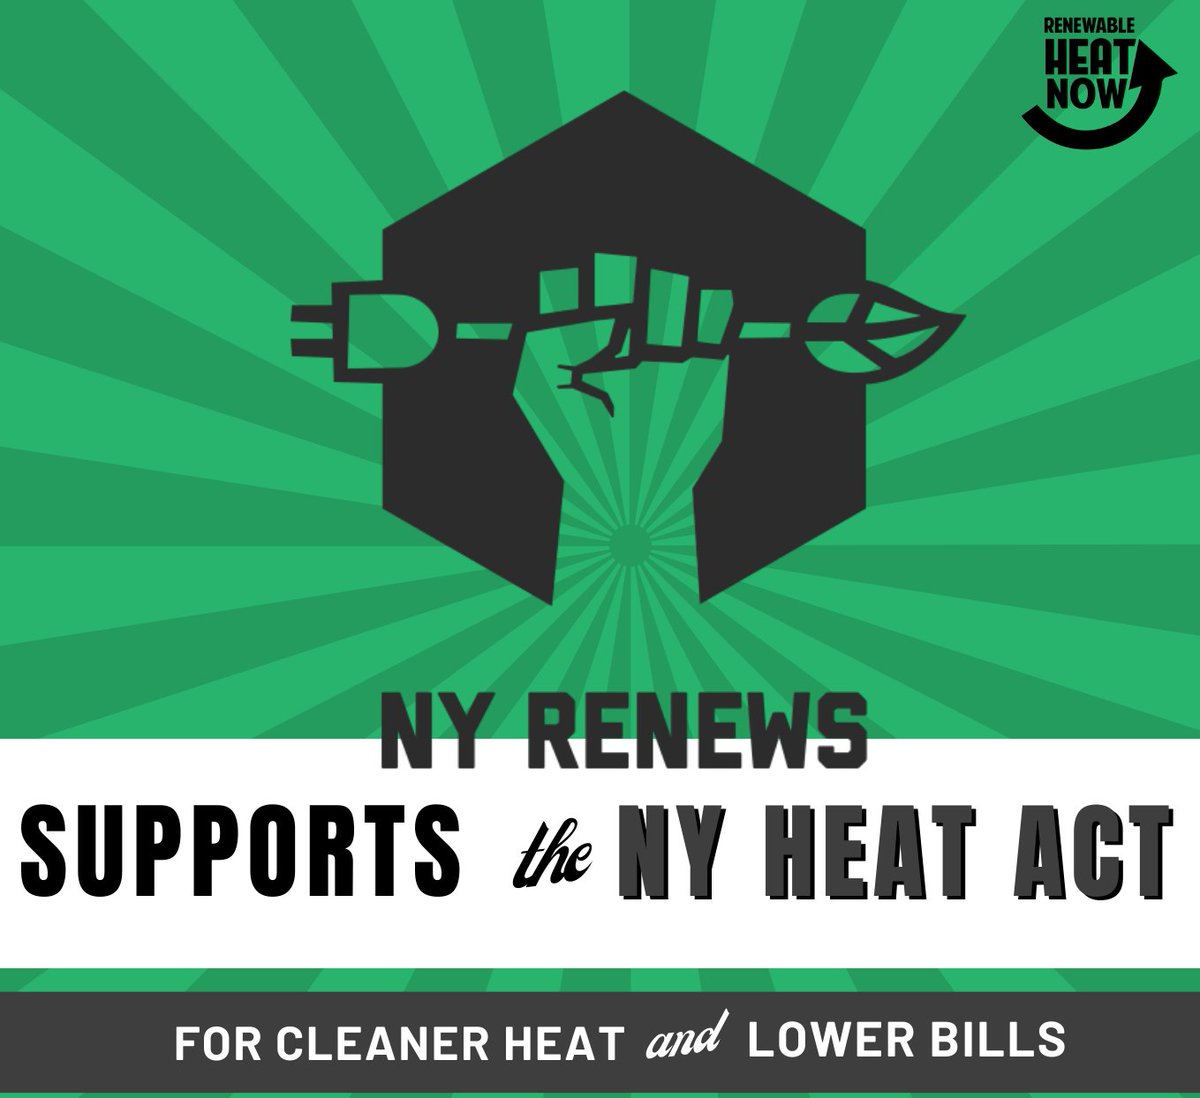 Too many NYers are struggling to pay their fossil-fueled utility bills. Let’s stop living in the fossil fuel past, and protect NYers from sky-high heating bills. Our clean heat starts this year with the *full* #NYHEAT Act! @CarlHeastie @DeborahJGlick @kenzebrowski_ny